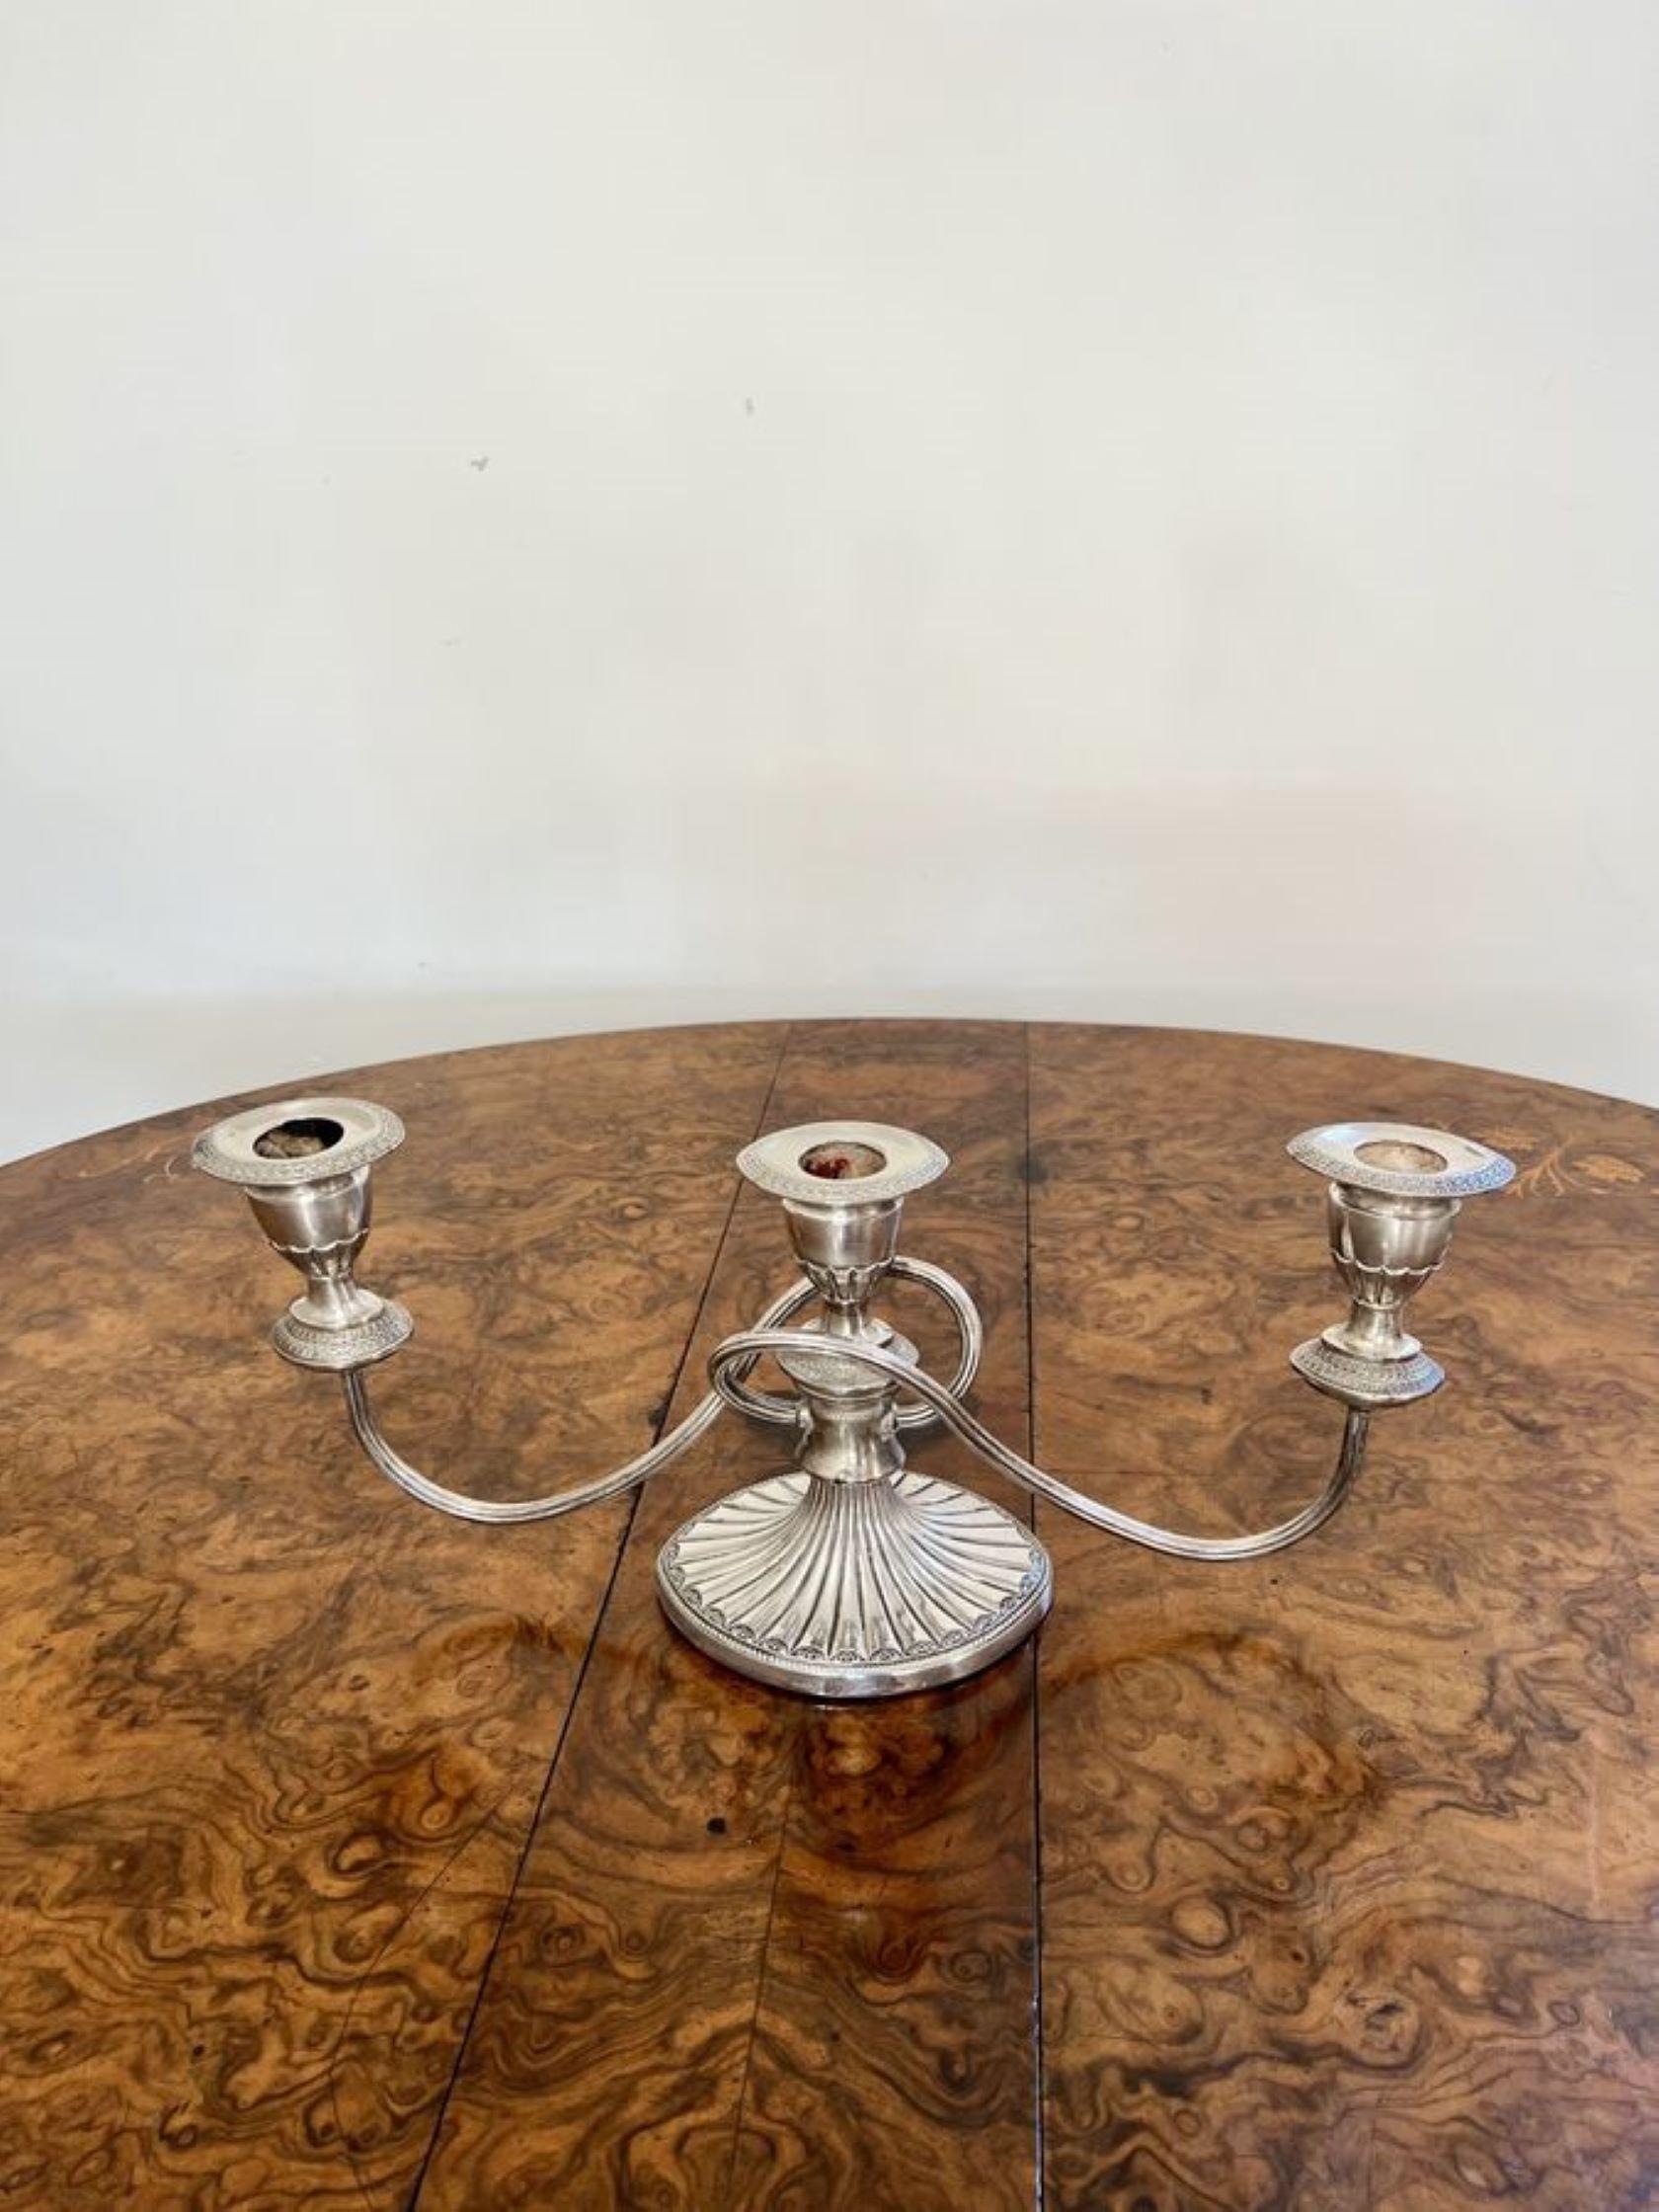 Quality pair of antique Victorian silver plated candelabras having a quality pair of antique Victorian candelabras with three light branches above a shaped column raised on ornate silver plated oval bases.

D. 1880